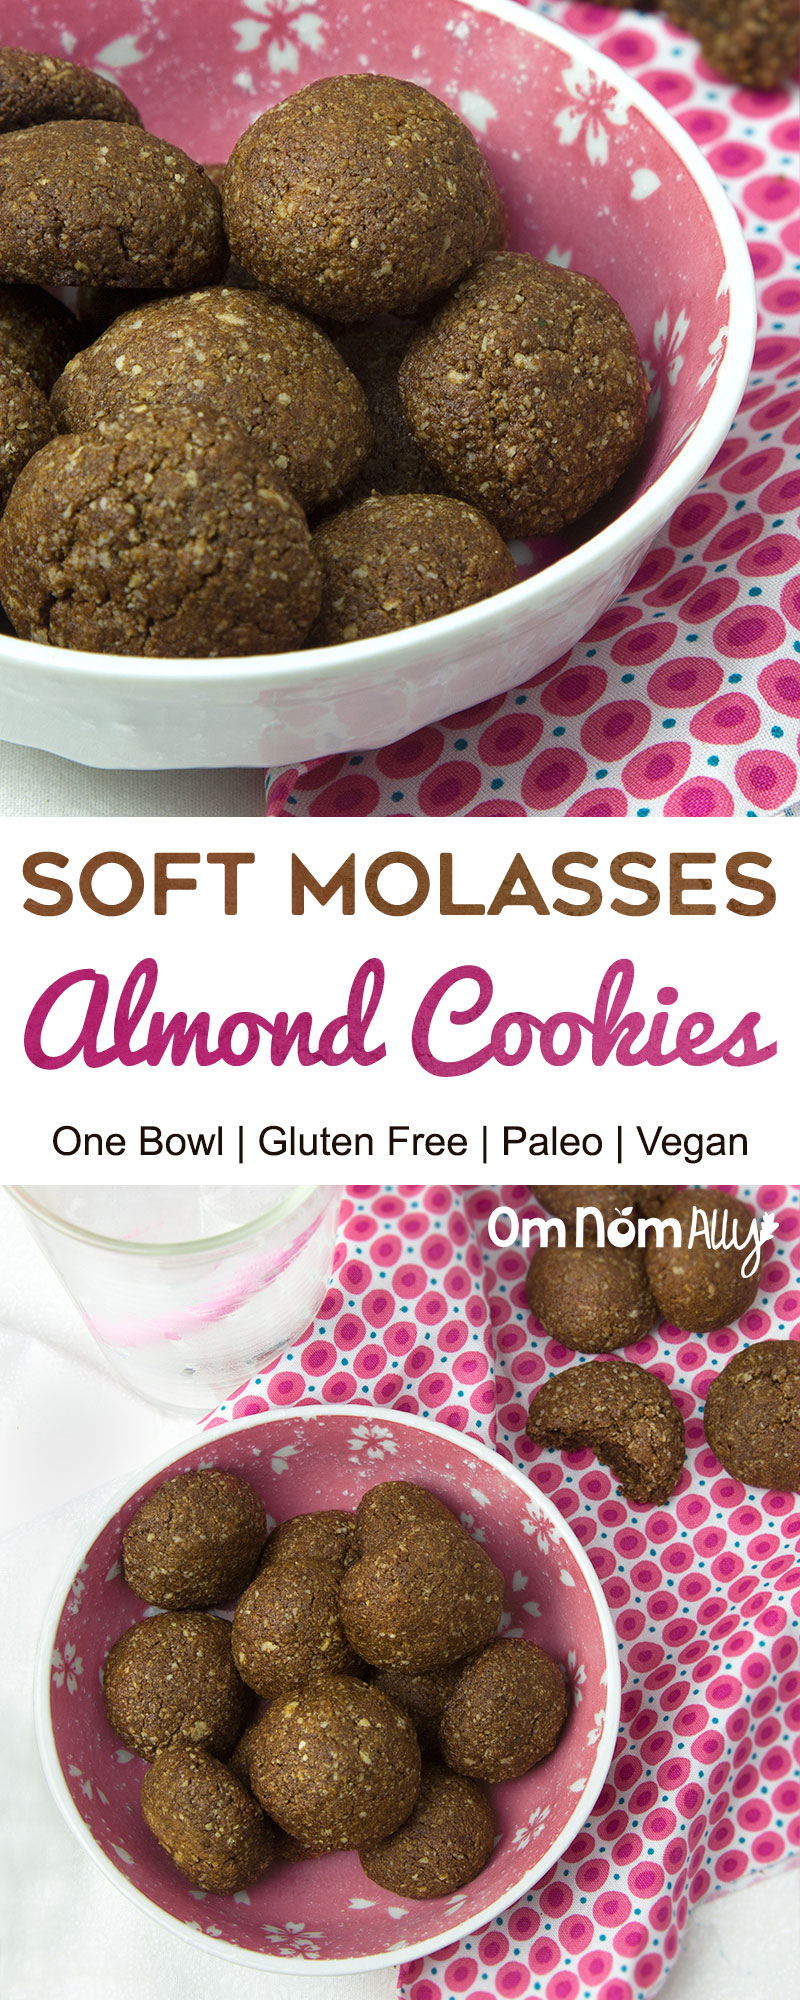 One Bowl Soft Molasses Almond Cookies @OmNomAlly | What's even better than a spicy, molasses cookie? Less washing up after baking! This one bowl, baking recipe with almond meal, blackstrap molasses, coconut oil and spices ticks all the boxes for a delicious, nutritious and low-effort baking adventure.